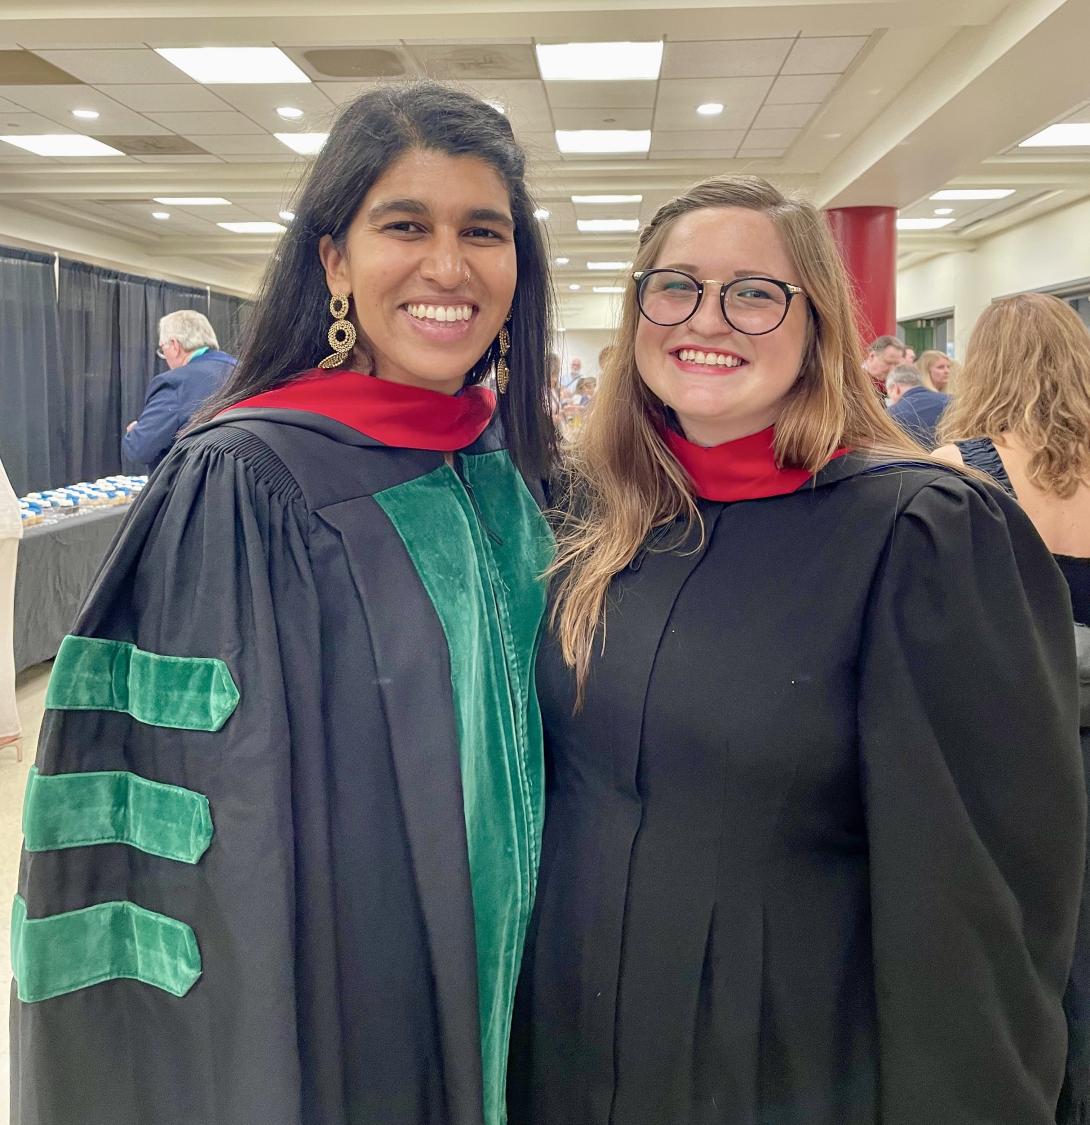 Two women stand together in their black graduation gowns